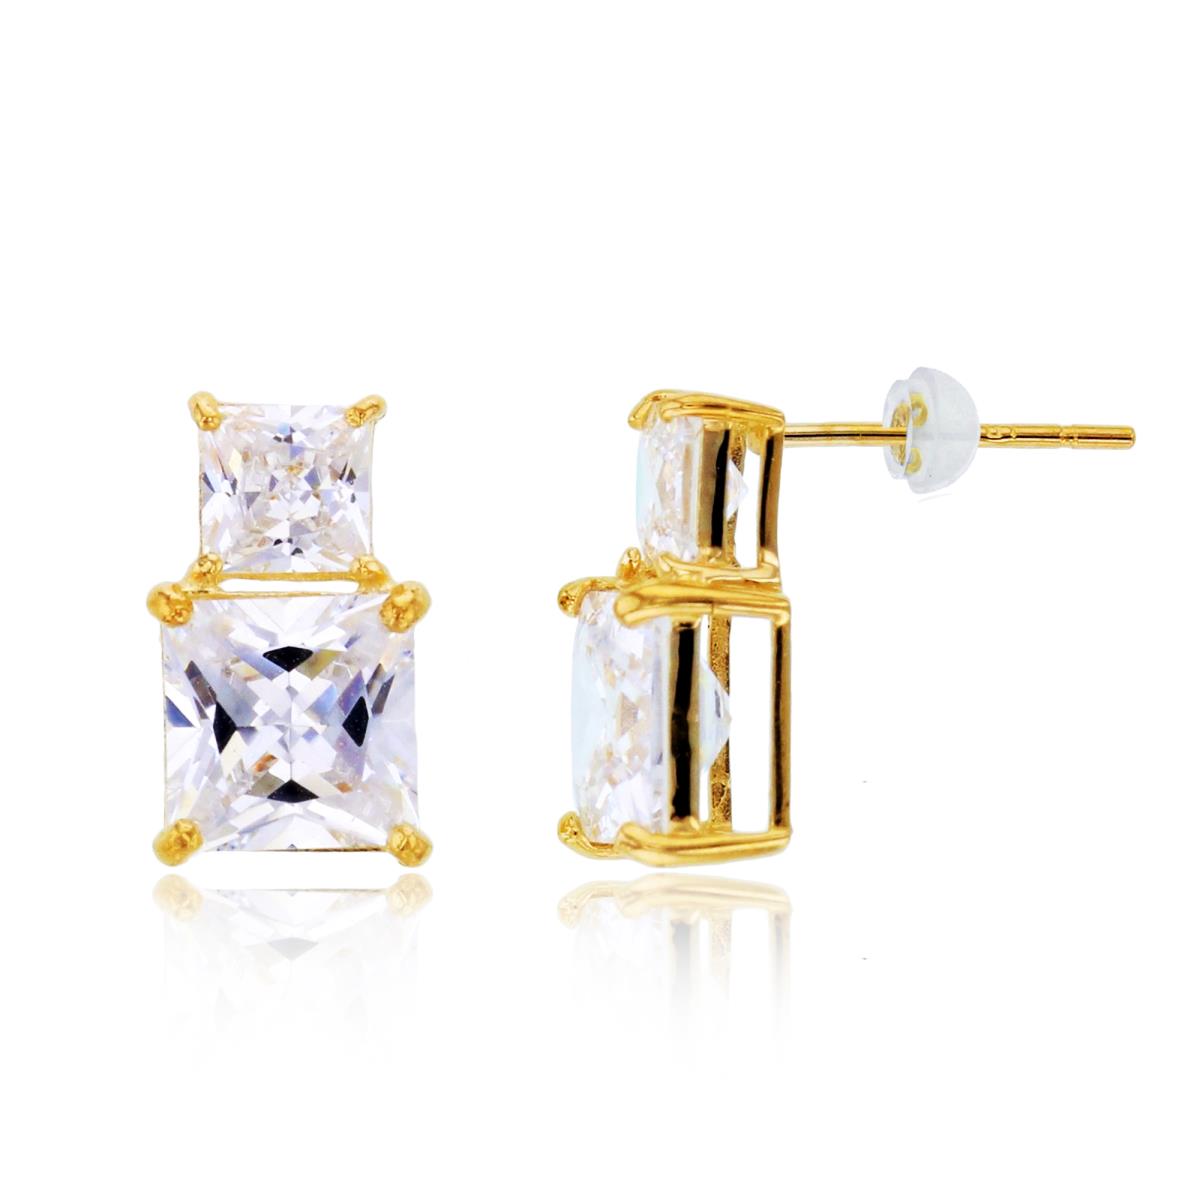 14K Yellow Gold 4mm & 6mm Princess CZ Studs with Silicon Backs